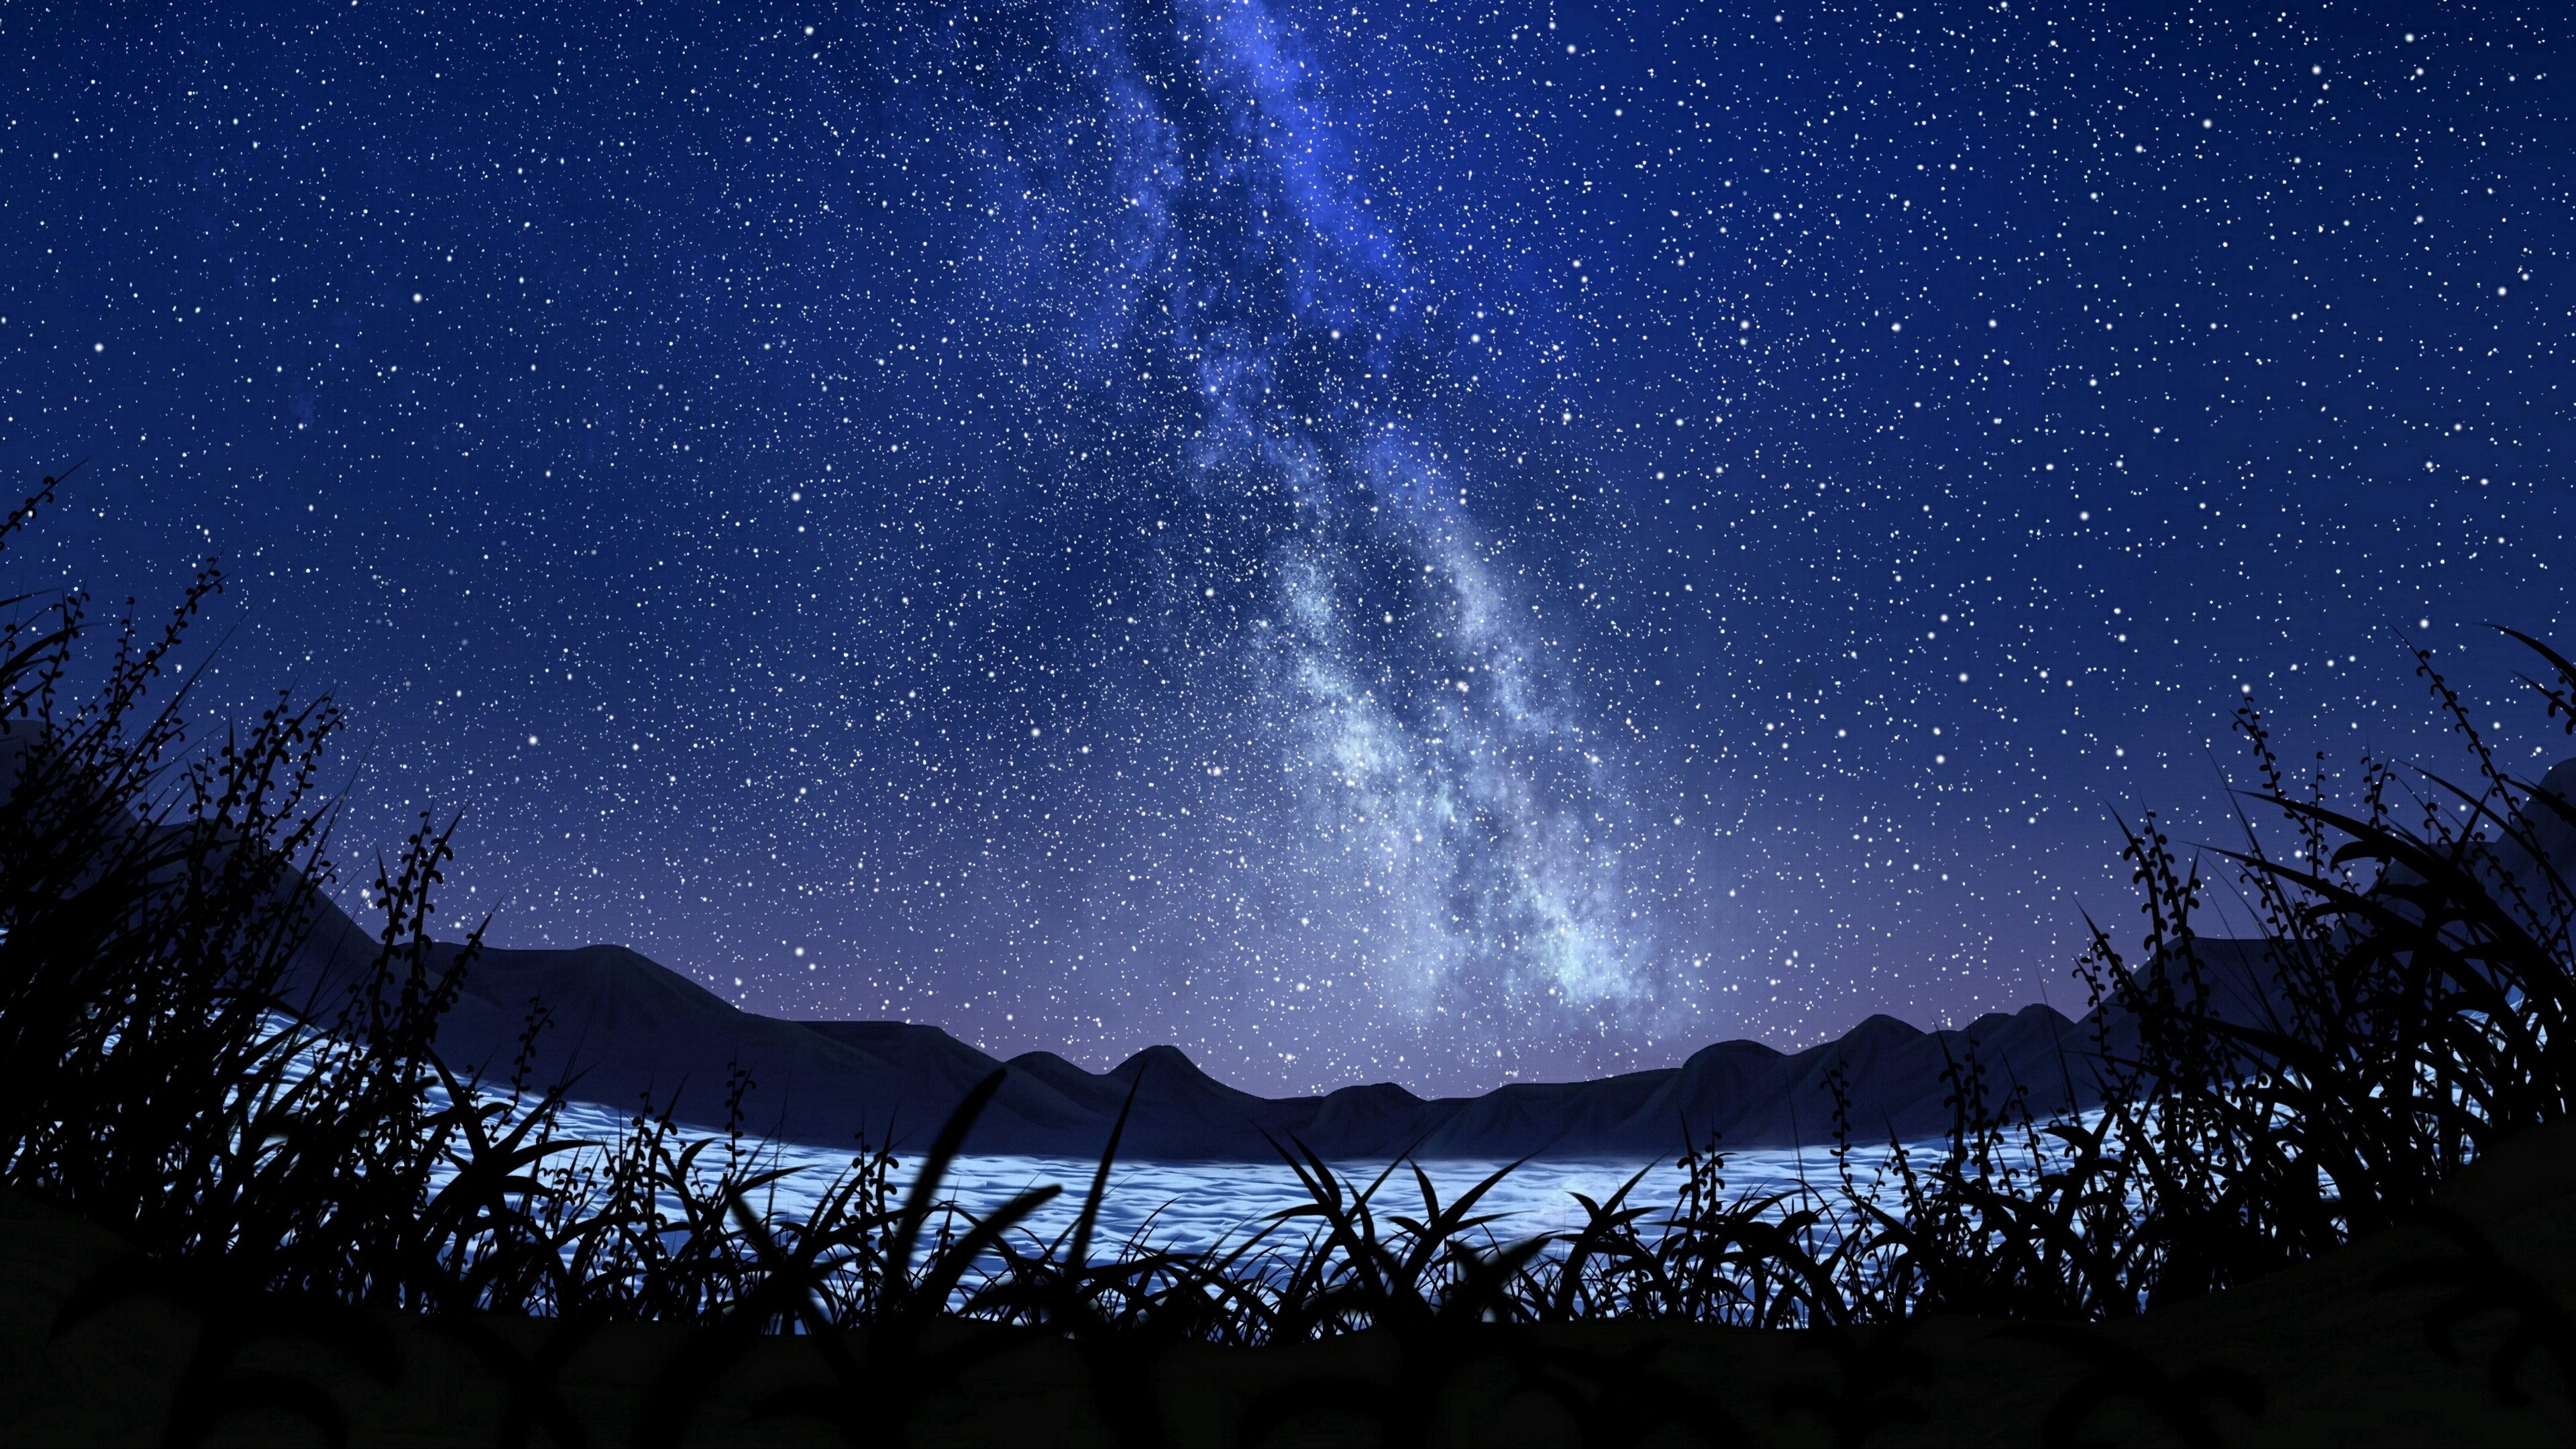 623 Starry Sky Wallpaper Photos, Pictures And Background Images For Free  Download - Pngtree